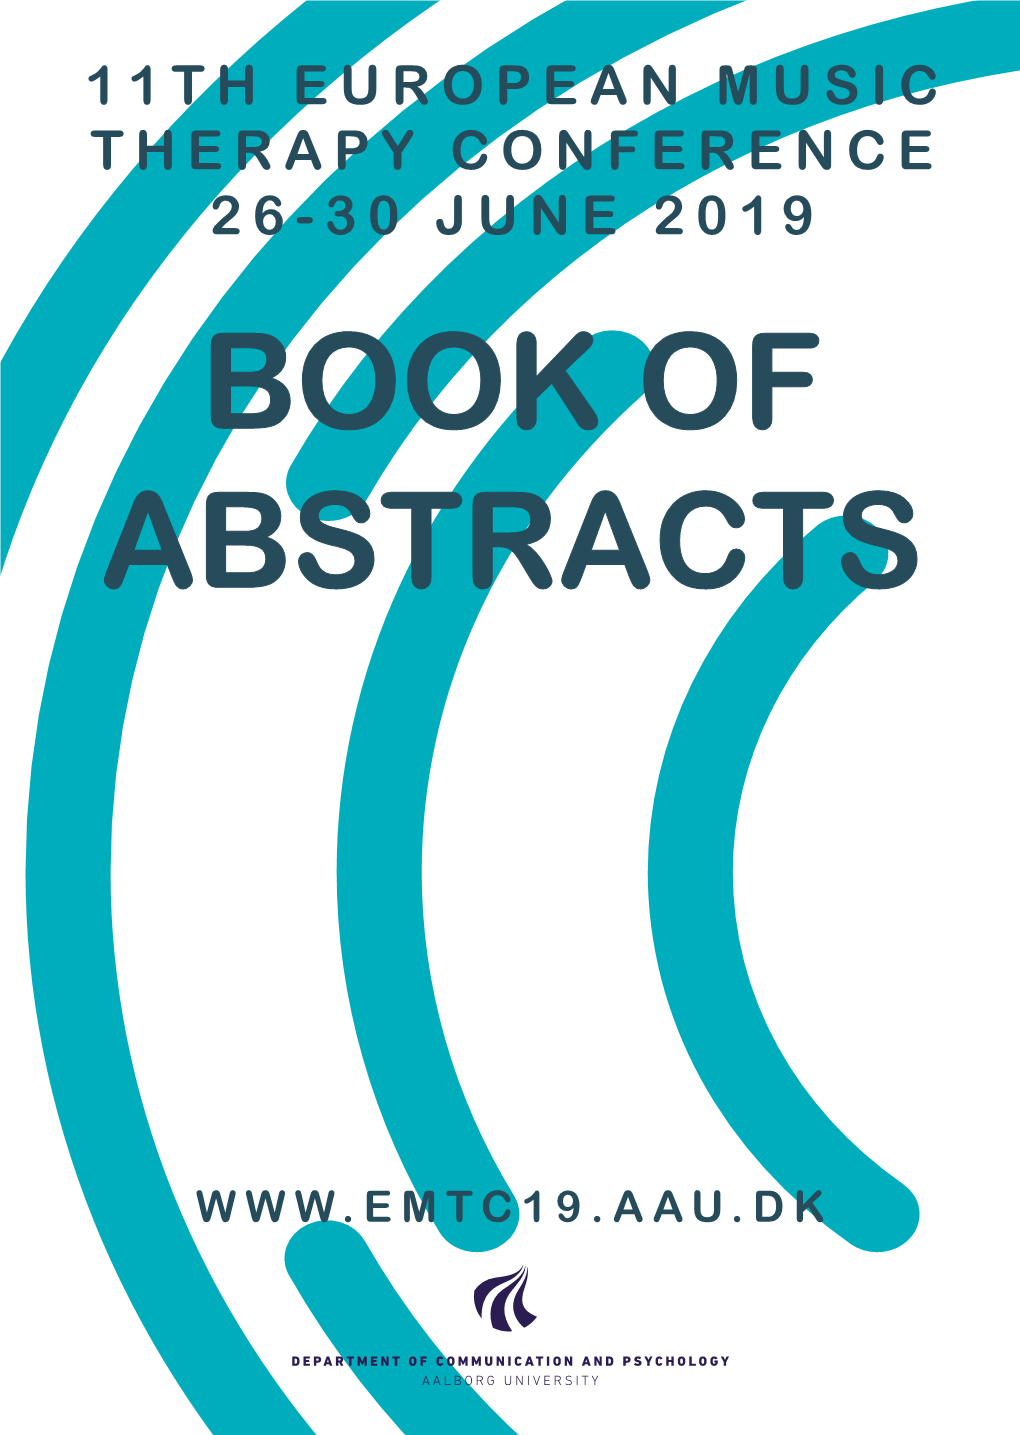 11Th European Music Therapy Conference 26-30 June 2019 Book of Abstracts